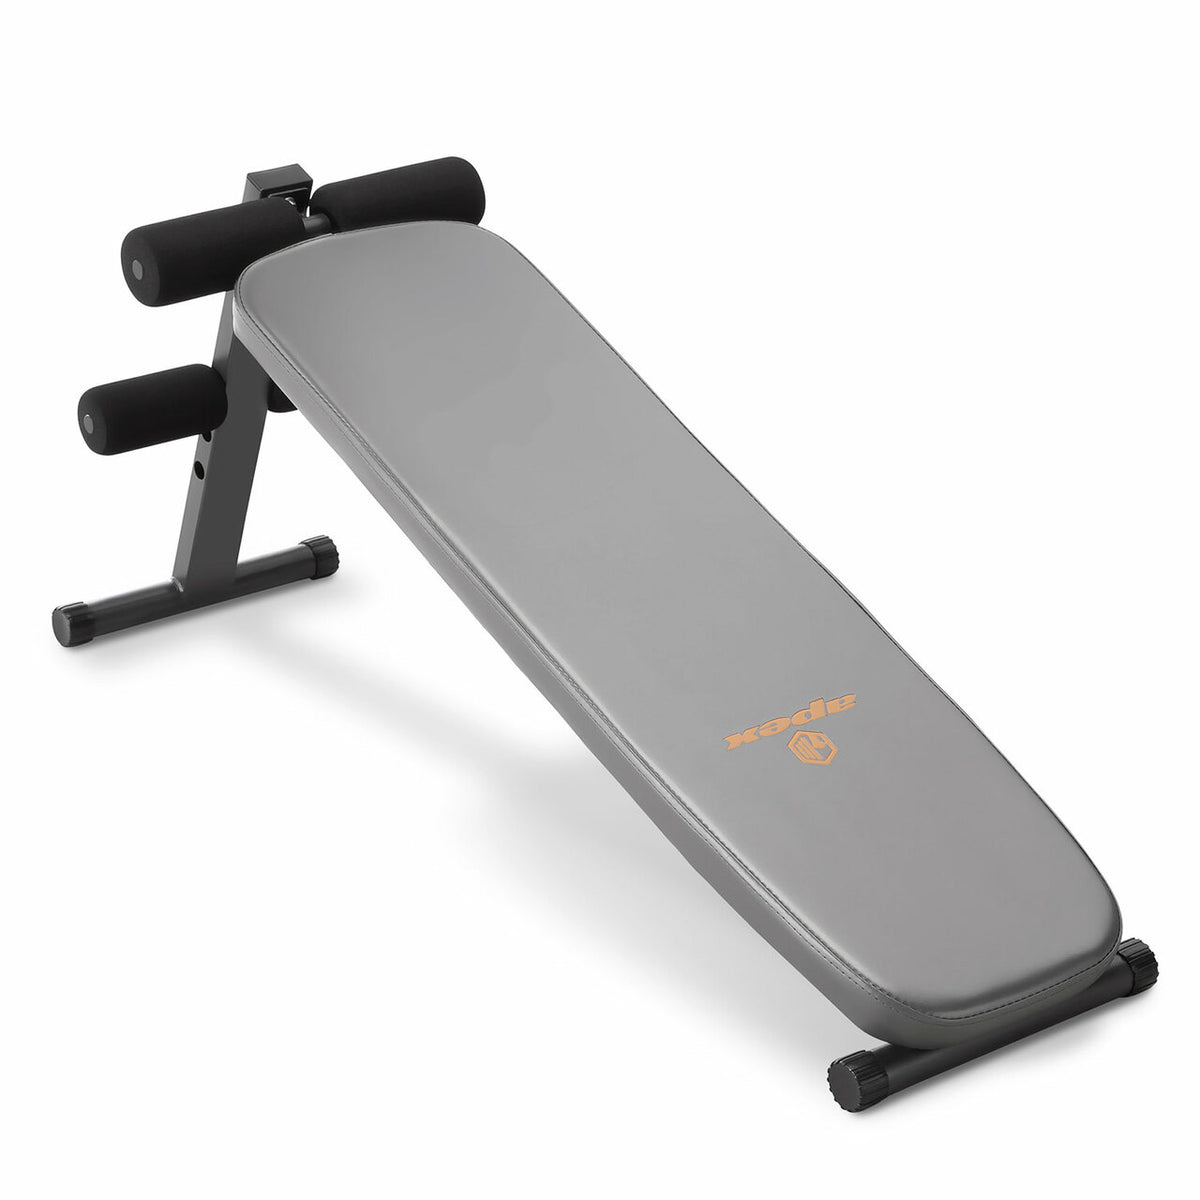 Apex Utility Bench Slant Board Sit Up Bench Crunch Board Ab Bench for  Toning and Strength Training JD-1.2, Adjustable Benches -  Canada